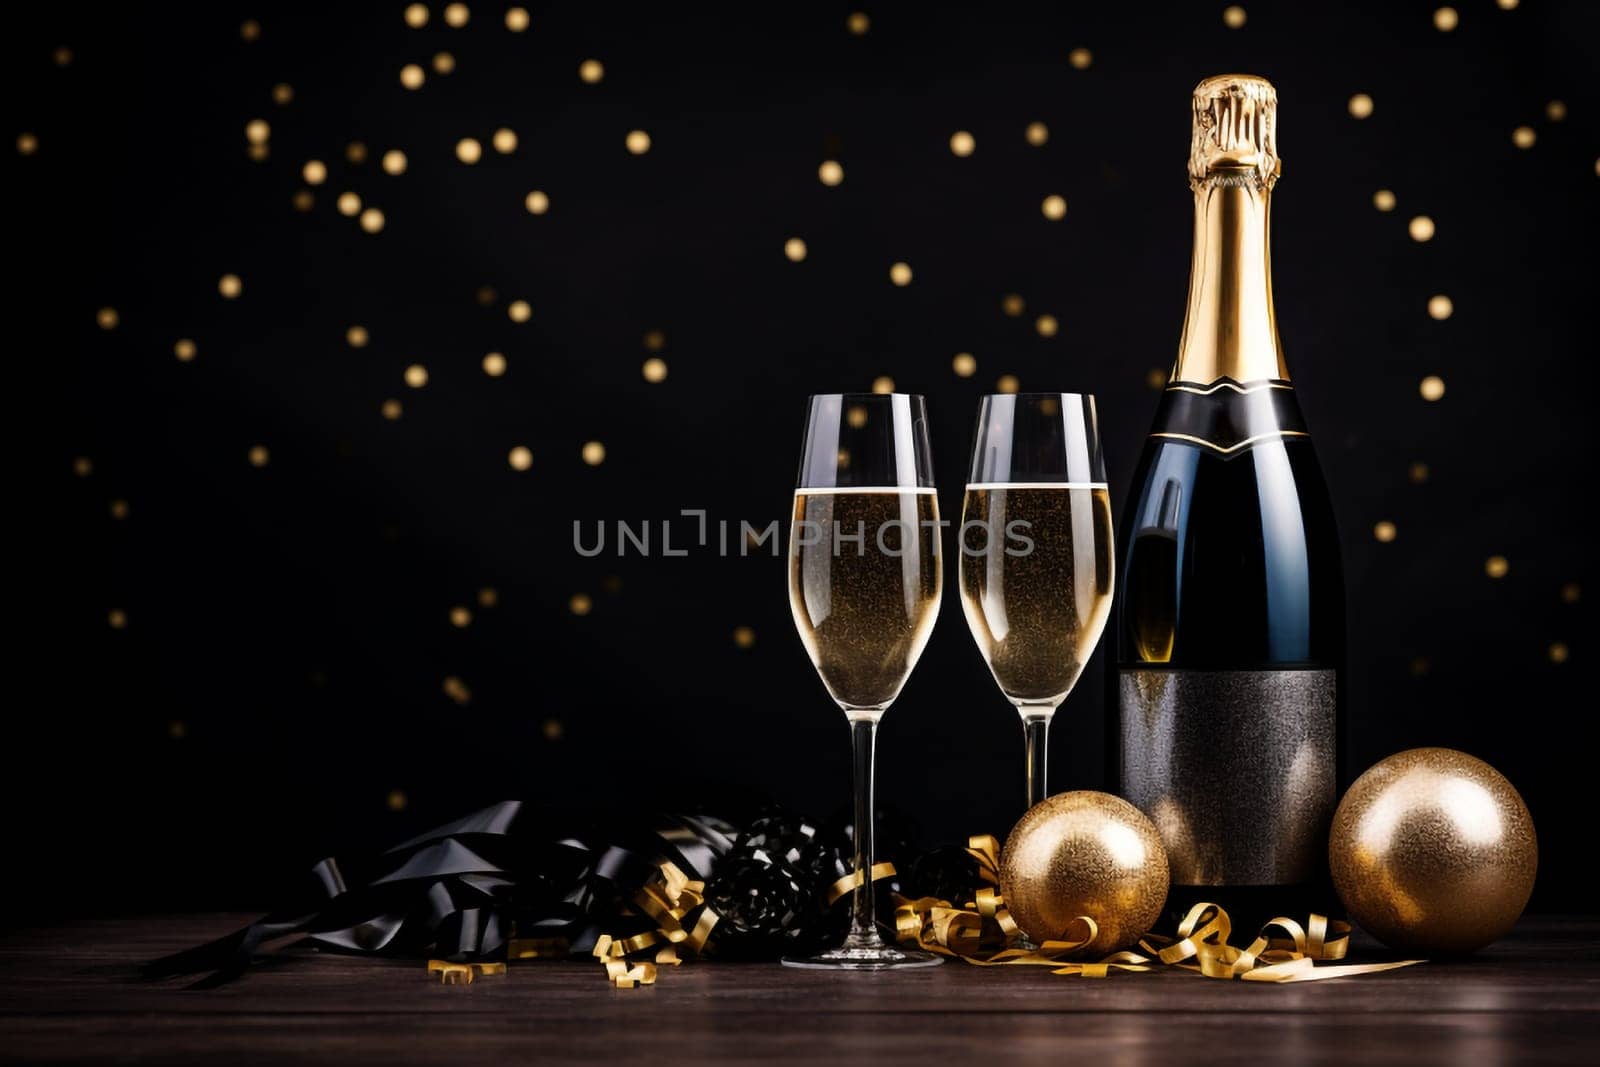 Premium Christmas Party Theme with Champagne Bottle, Wine Glasses, Golden Confetti, and Decorative Balls on a Stylish Dark Background. Lavish Flat Lay Arrangement with copy space.